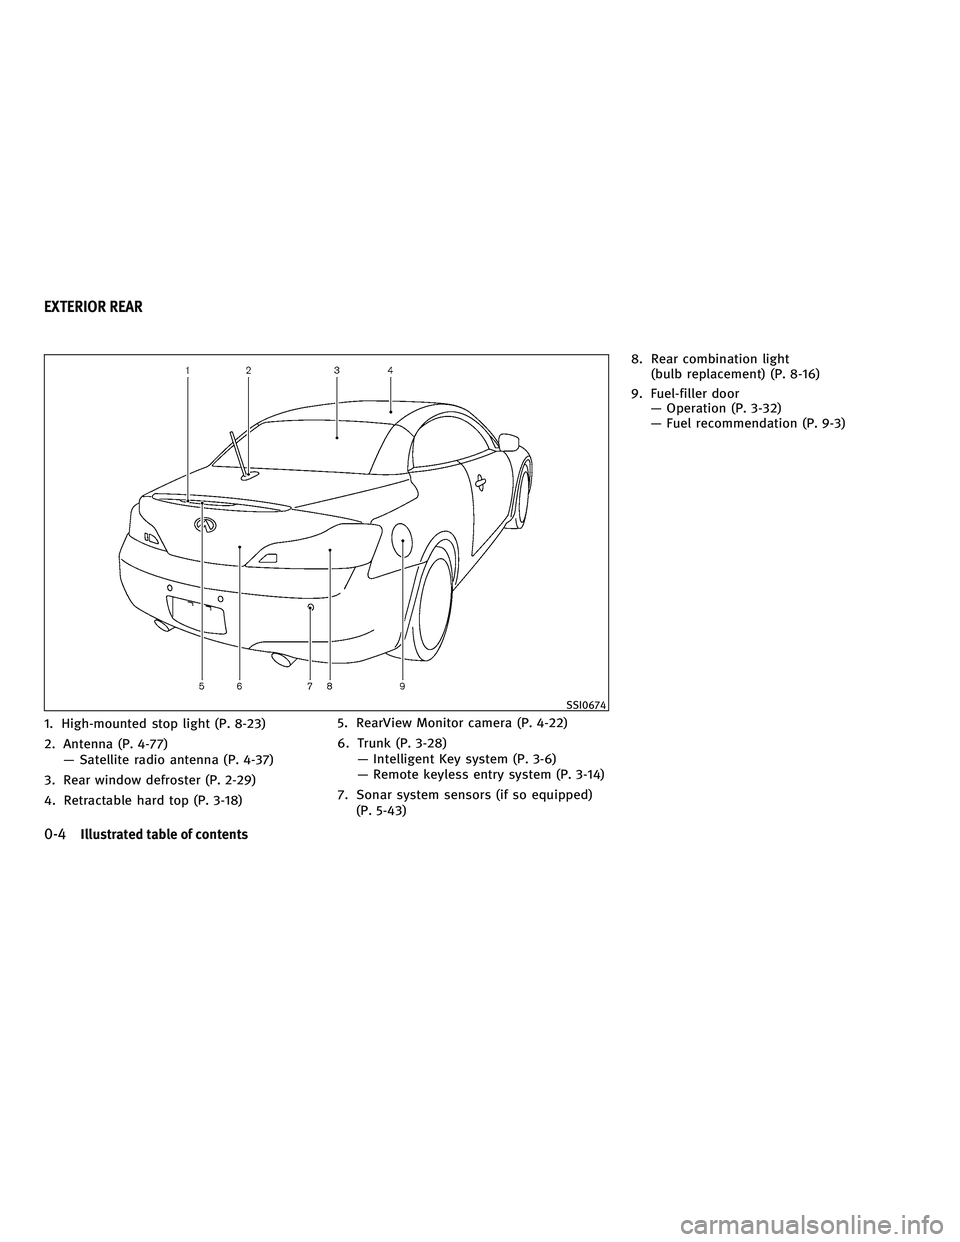 INFINITI G-CONVERTIBLE 2010 User Guide 1. High-mounted stop light (P. 8-23)
2. Antenna (P. 4-77)— Satellite radio antenna (P. 4-37)
3. Rear window defroster (P. 2-29)
4. Retractable hard top (P. 3-18) 5. RearView Monitor camera (P. 4-22)